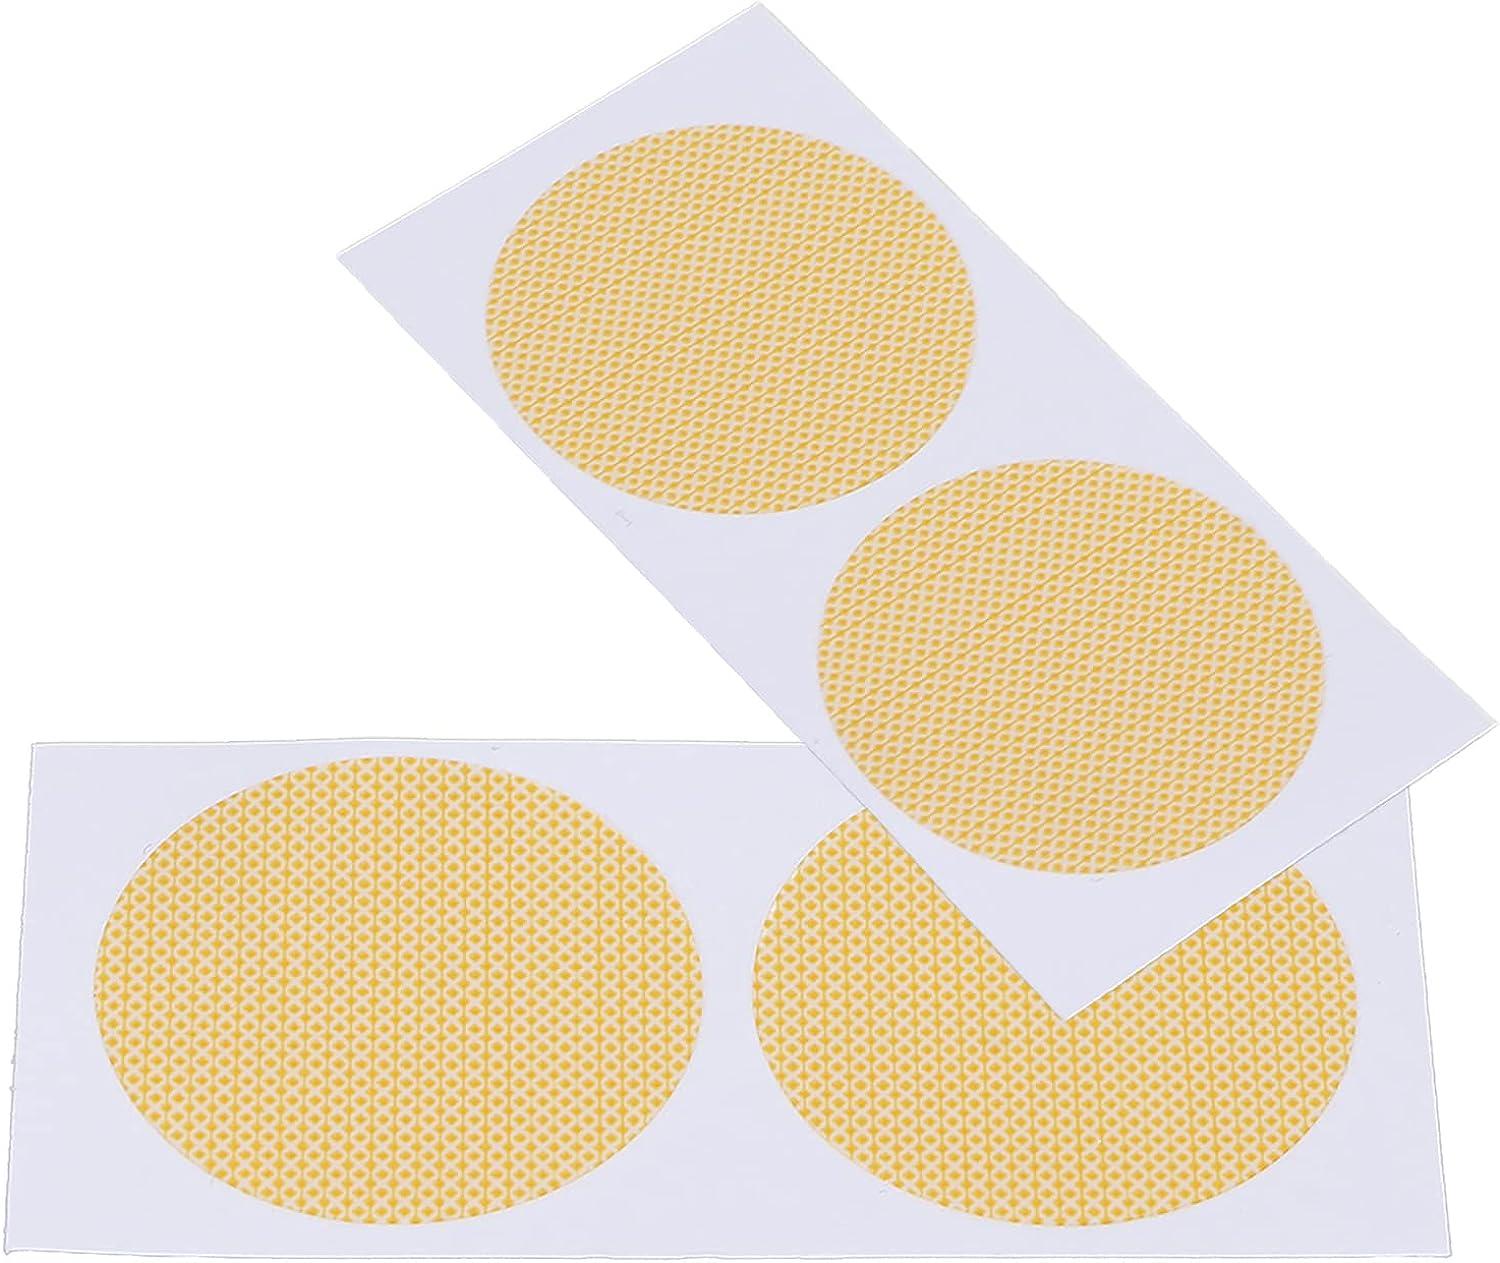 60Pcs Nude Invisible Adhesive Chafing Breathable Anti Chafing Hide Breast  Pasties for Joggers 